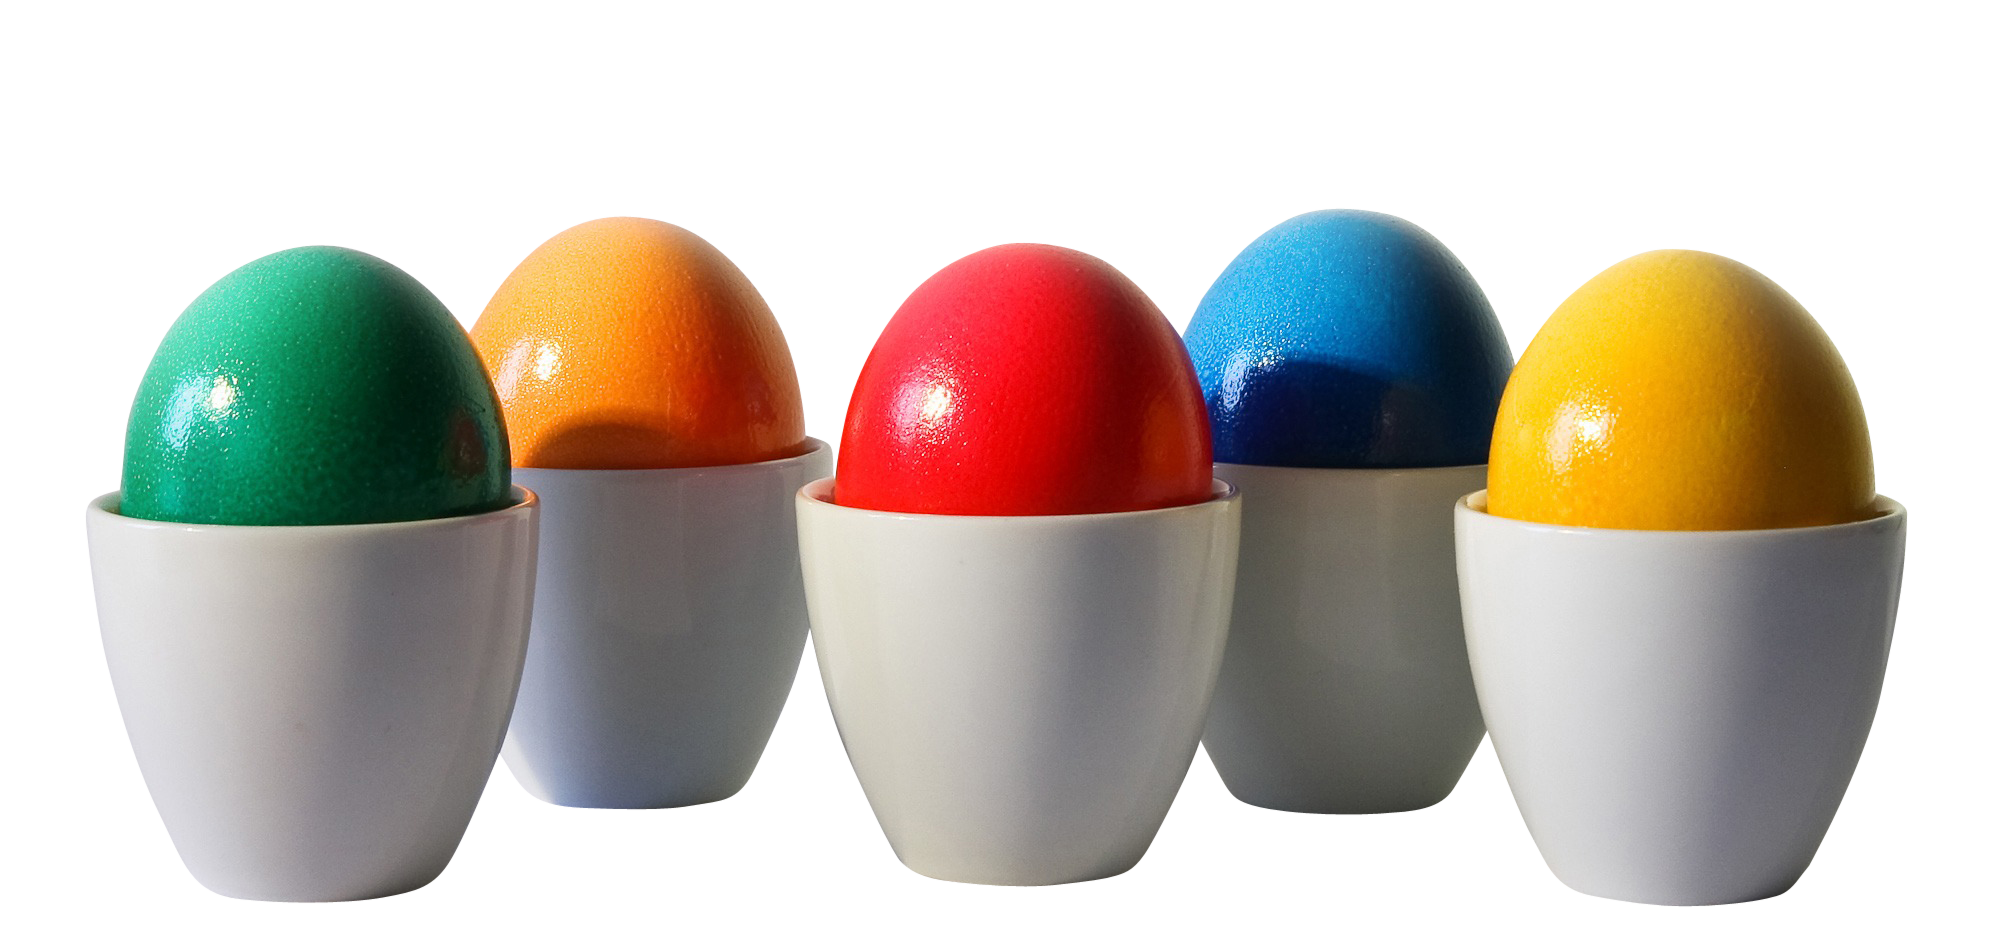 A Group Of Eggs In Cups